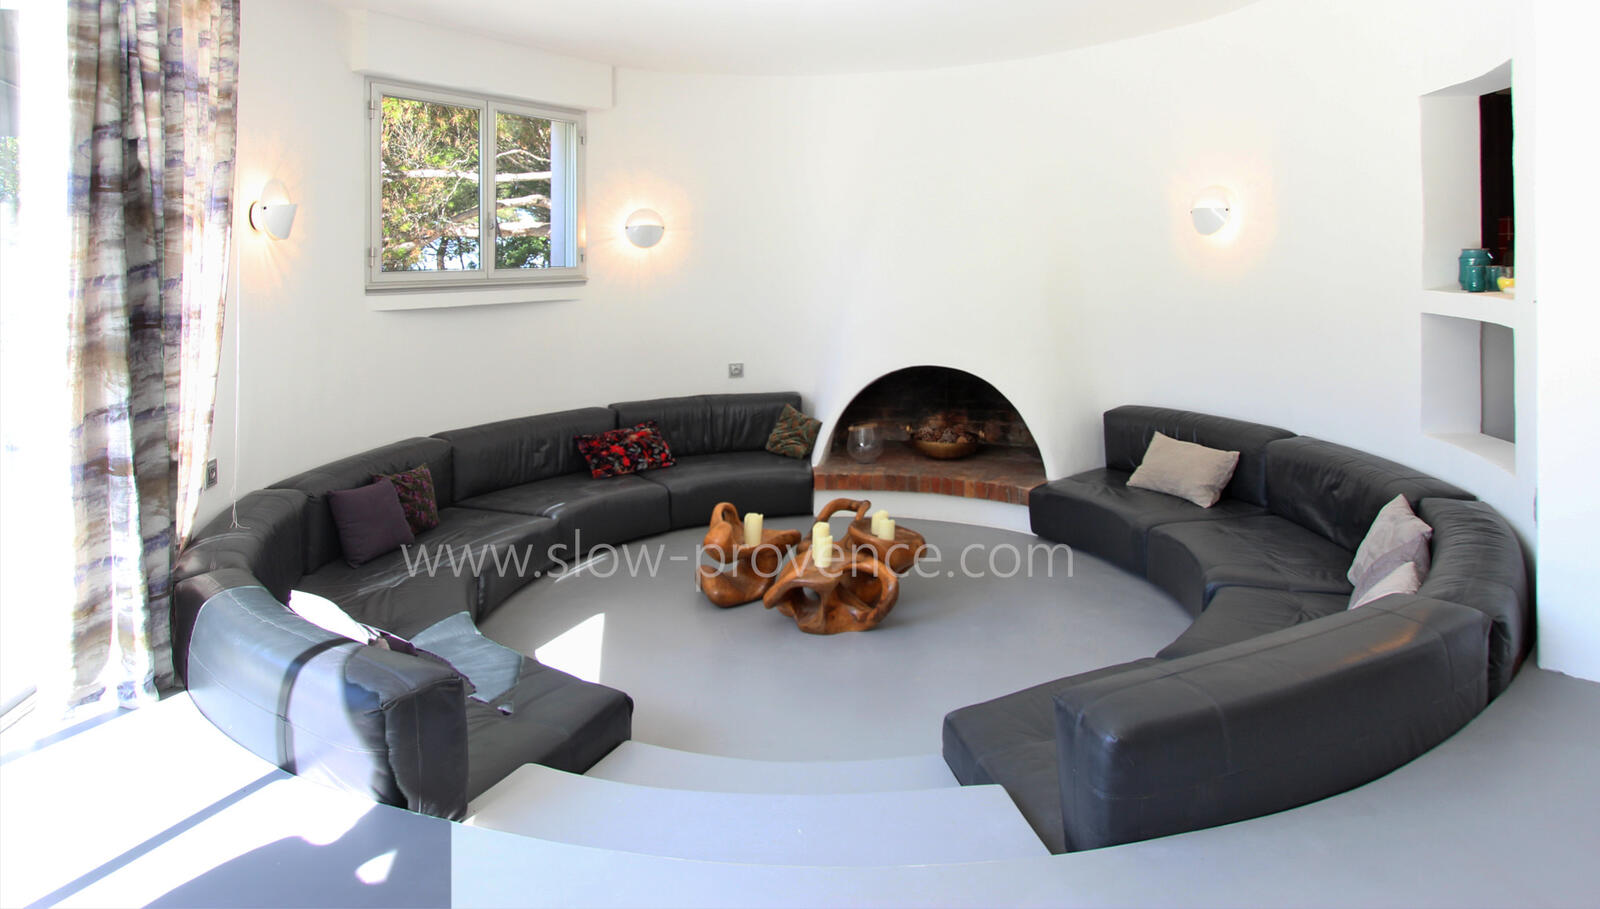 Round built-in lounge